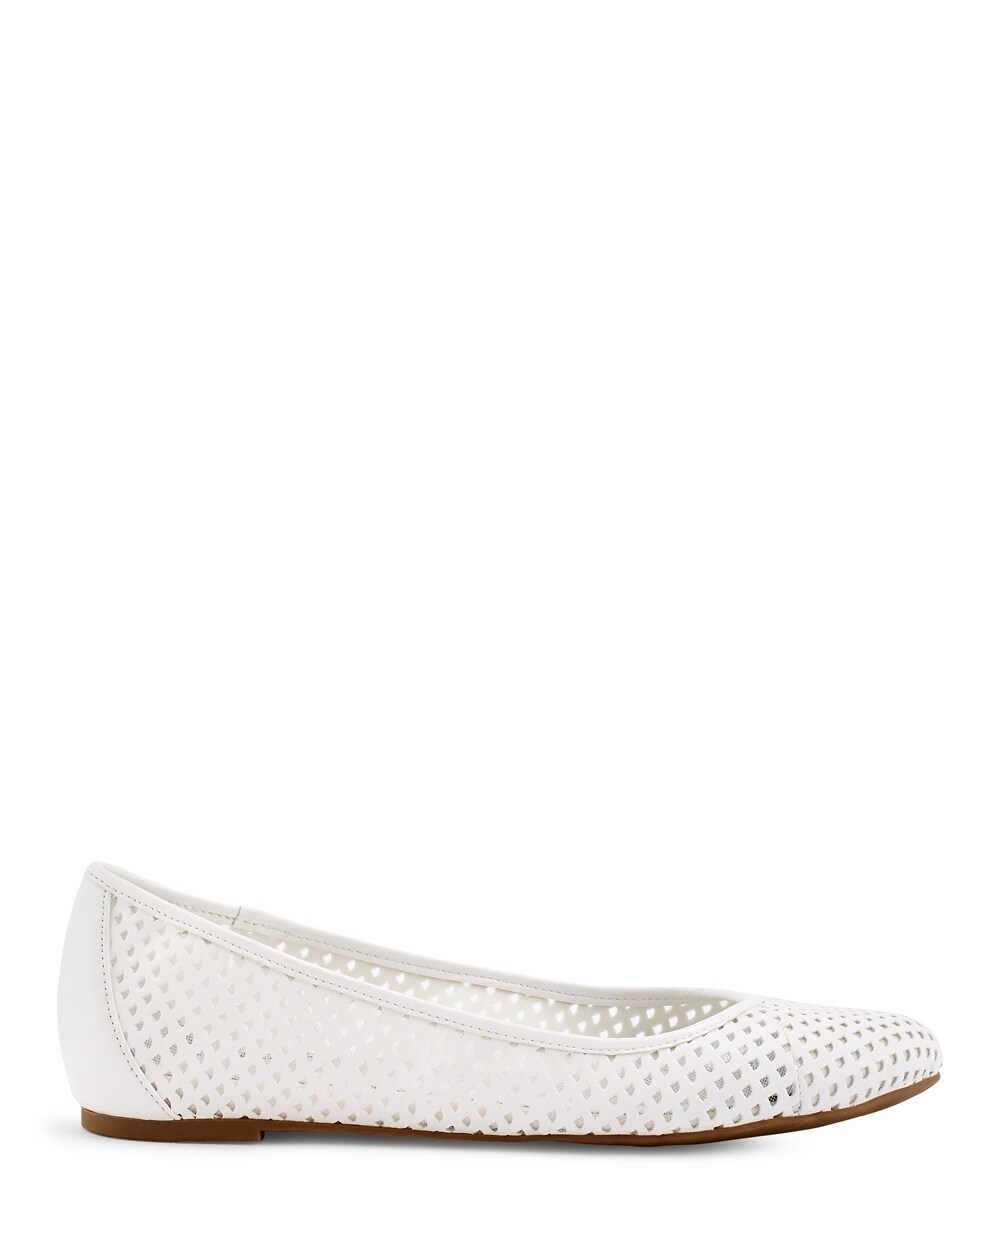 Perforated White Flats